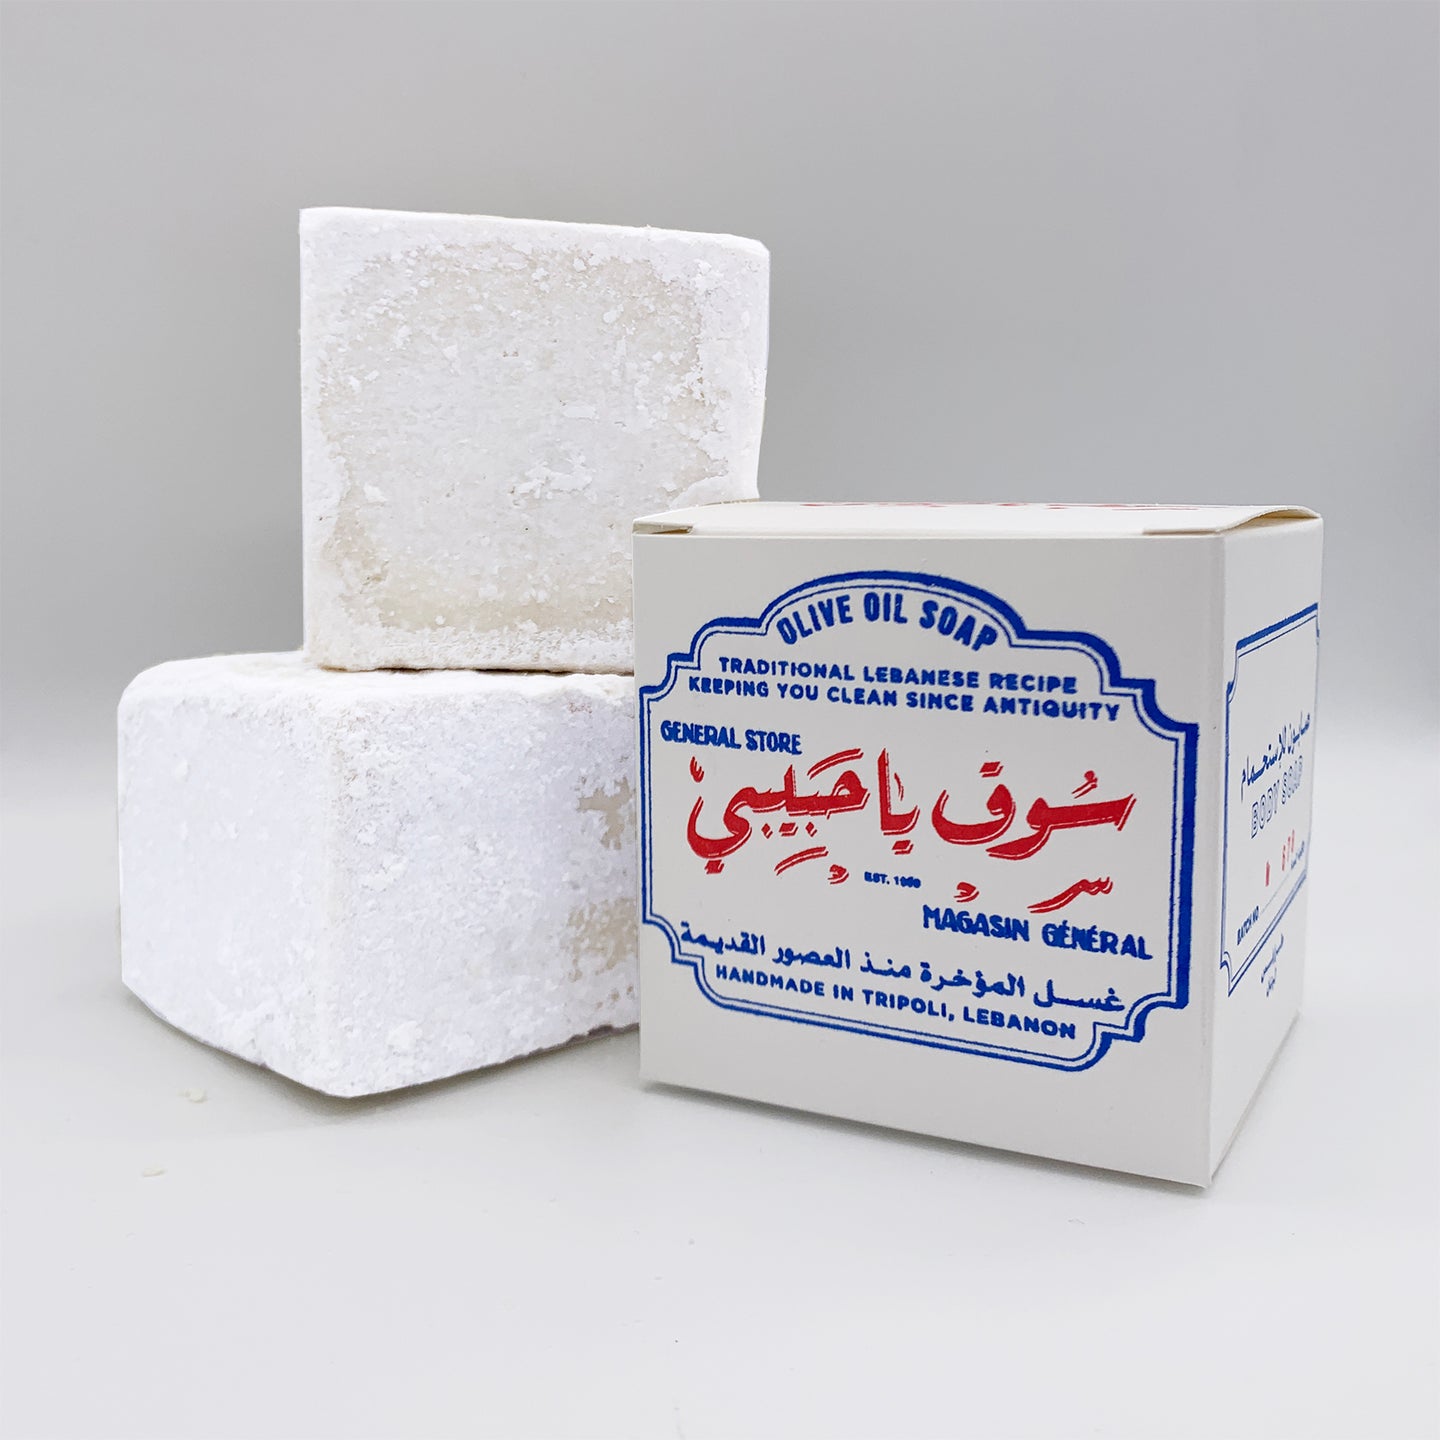 Lebanese Traditional Olive Oil Soap